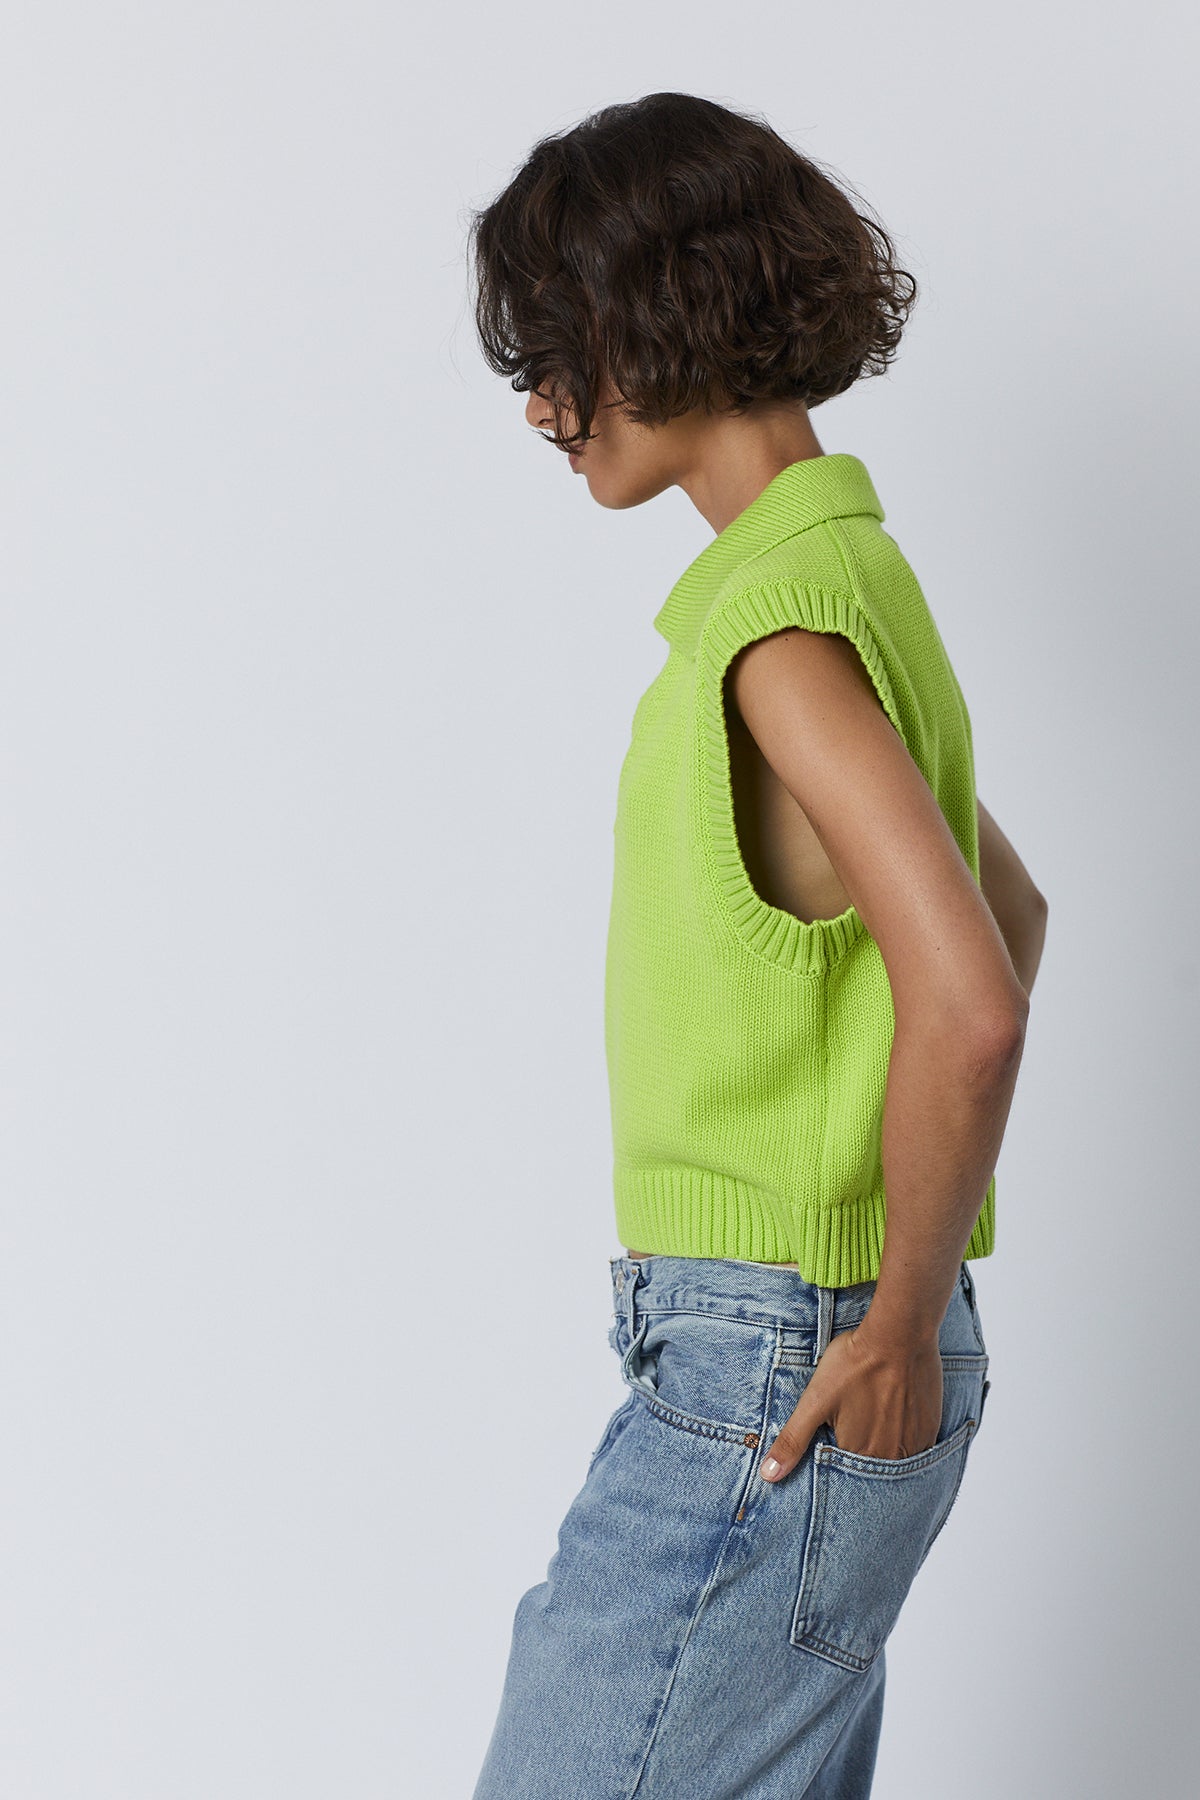 Avalon Sweater Tank in acid neon lime color with blue denim side-26002773311681